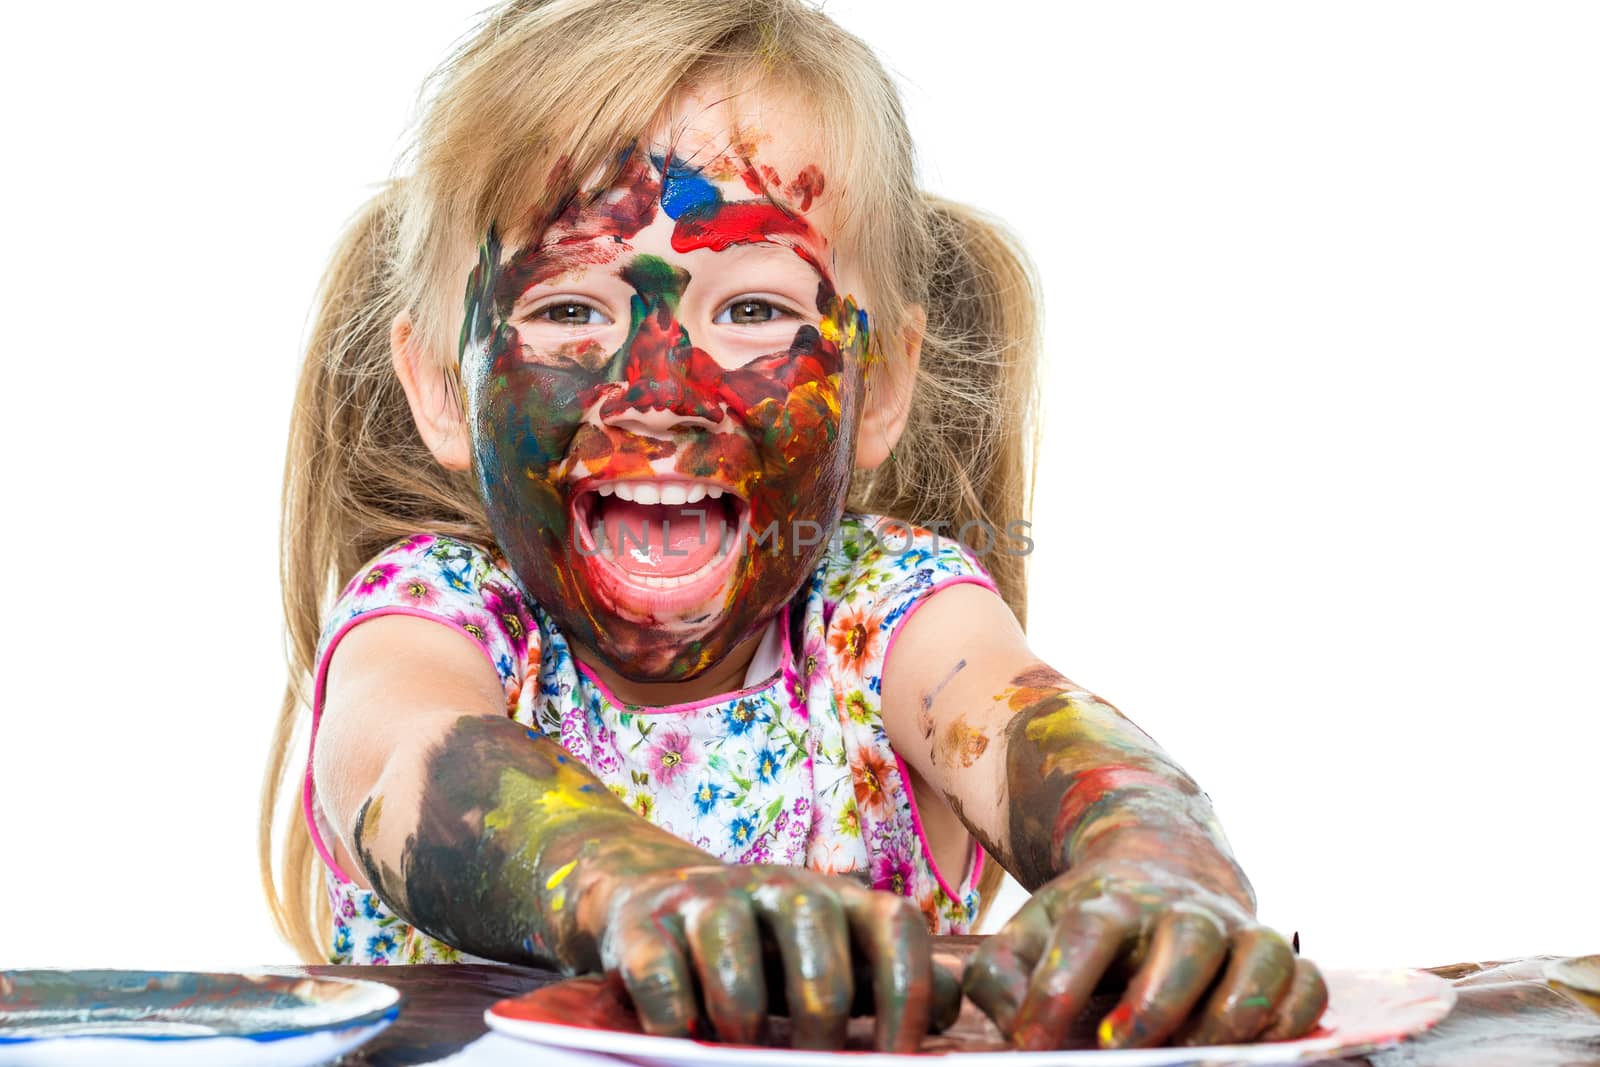 Excited girl having fun with color paint. by karelnoppe